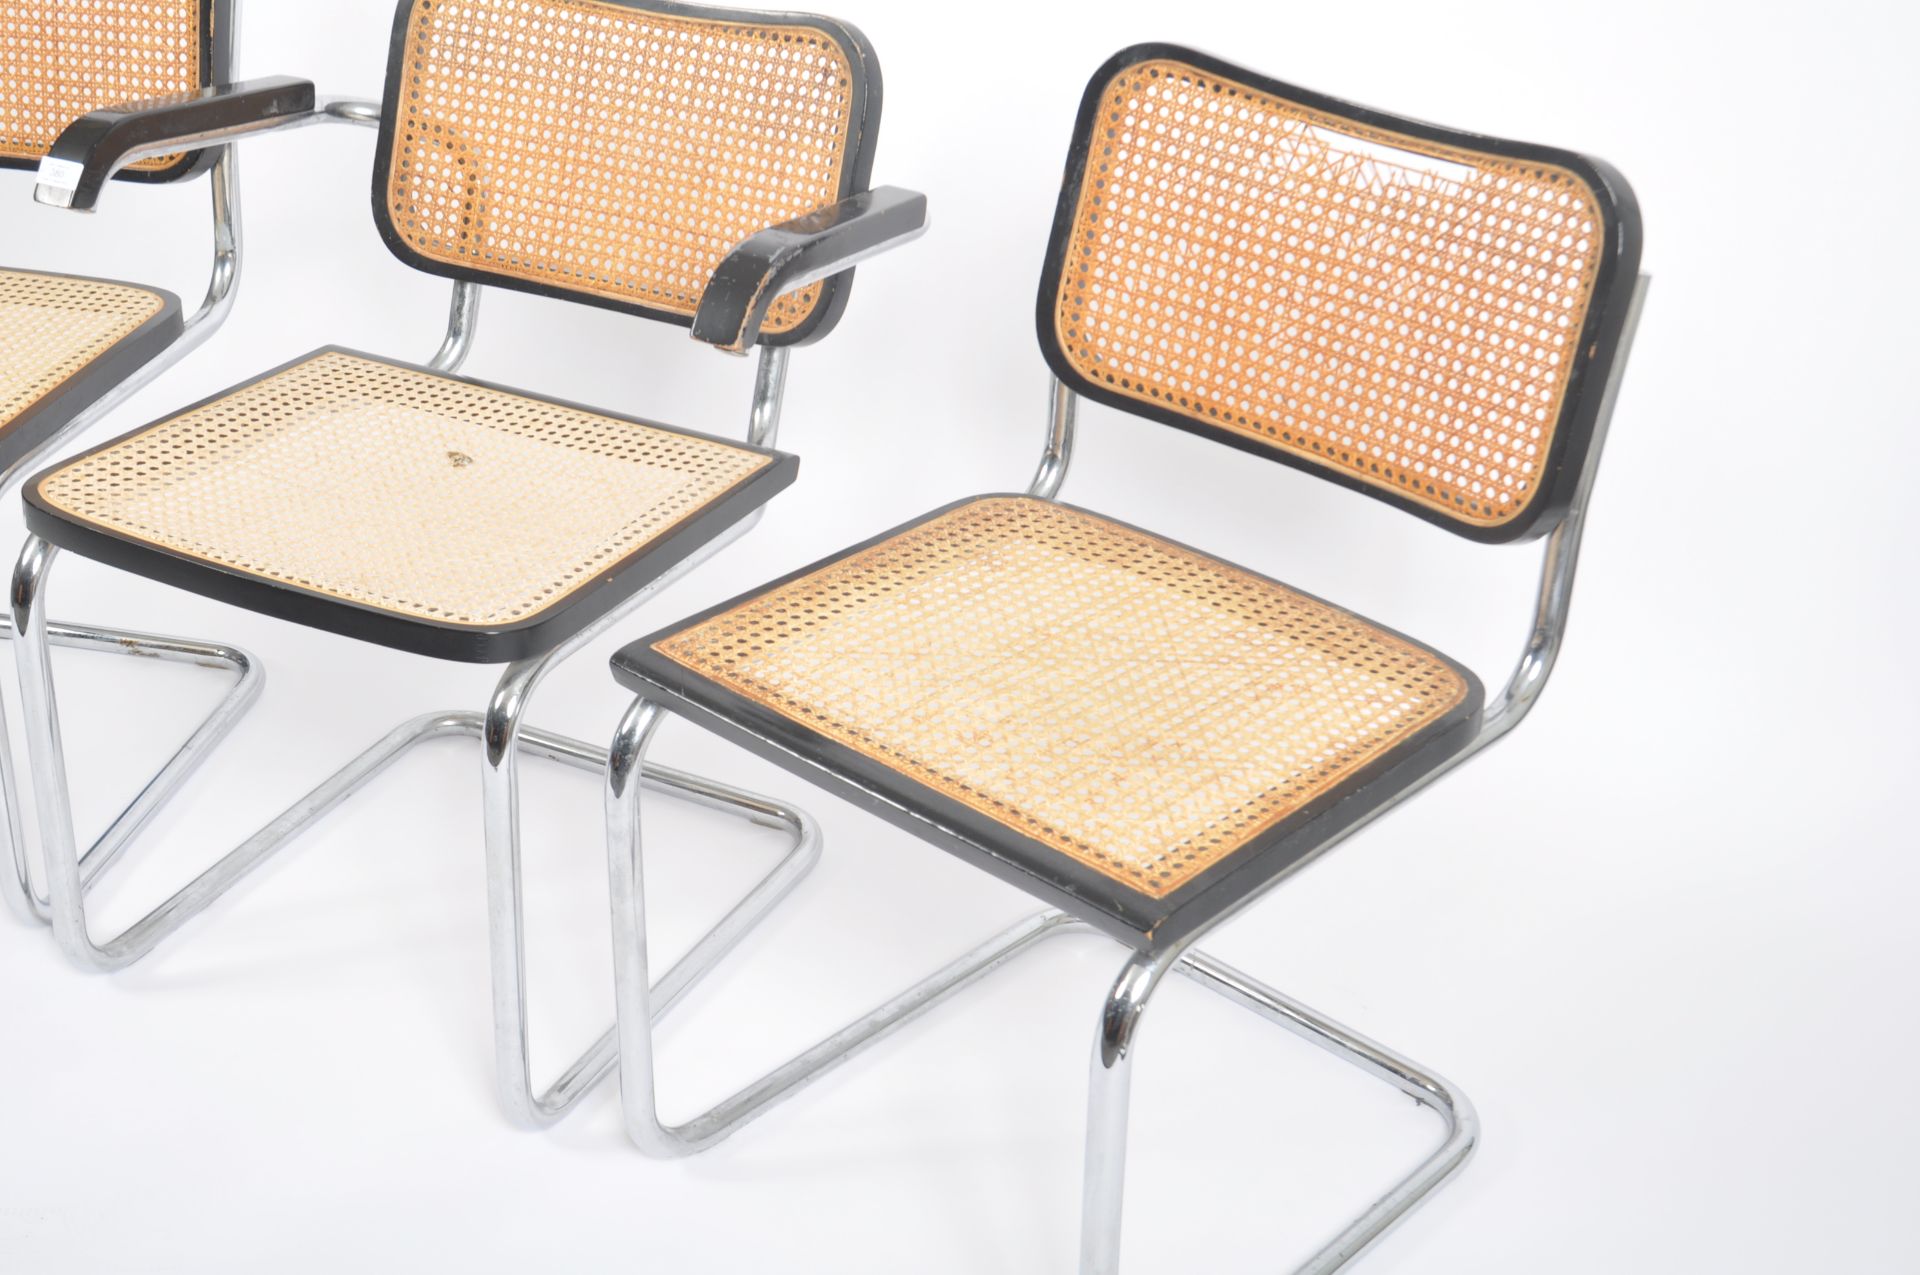 MARCEL BREUER CESCA CHAIRS - SET OF SIX DINING CHAIRS - Image 3 of 10